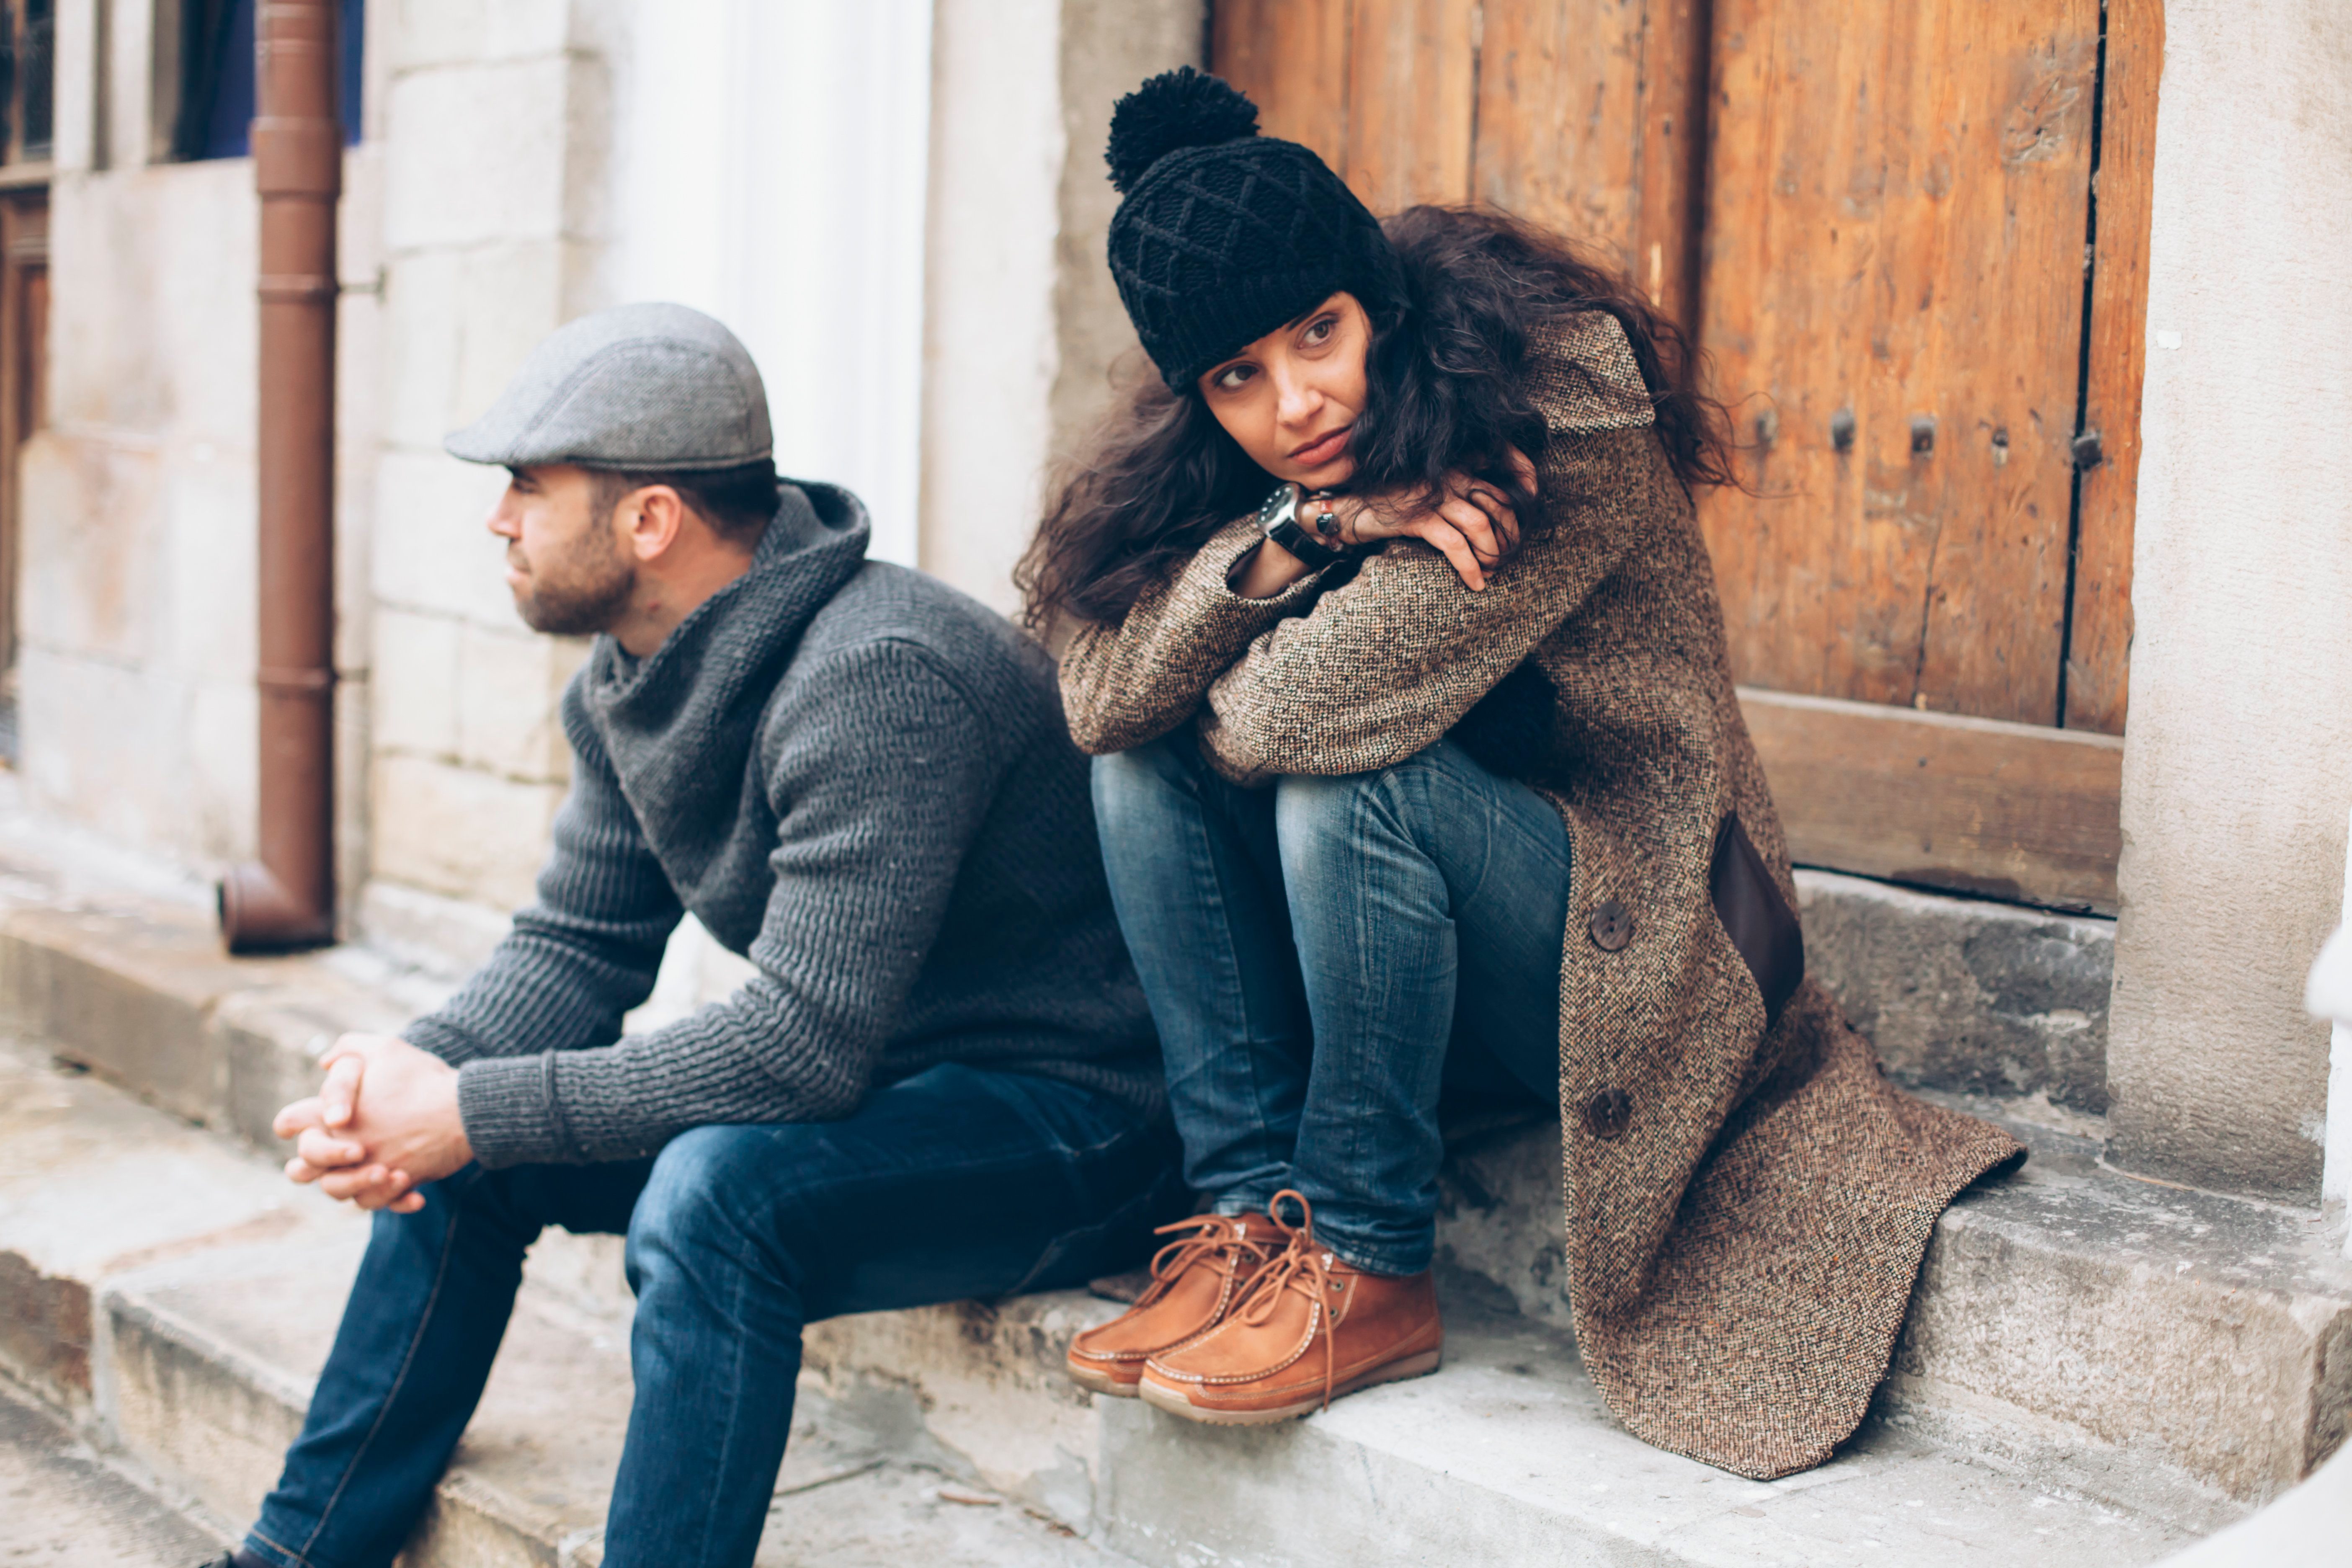 Young couple having relationship difficulties. Man and woman sitting on stairs in front of a closed wooden door. Wears warm clothes - jeans, sweater, coat, hat and scarf. Both looking in different directions. On background building facade, wooden front door, rainwater gutter and windows.